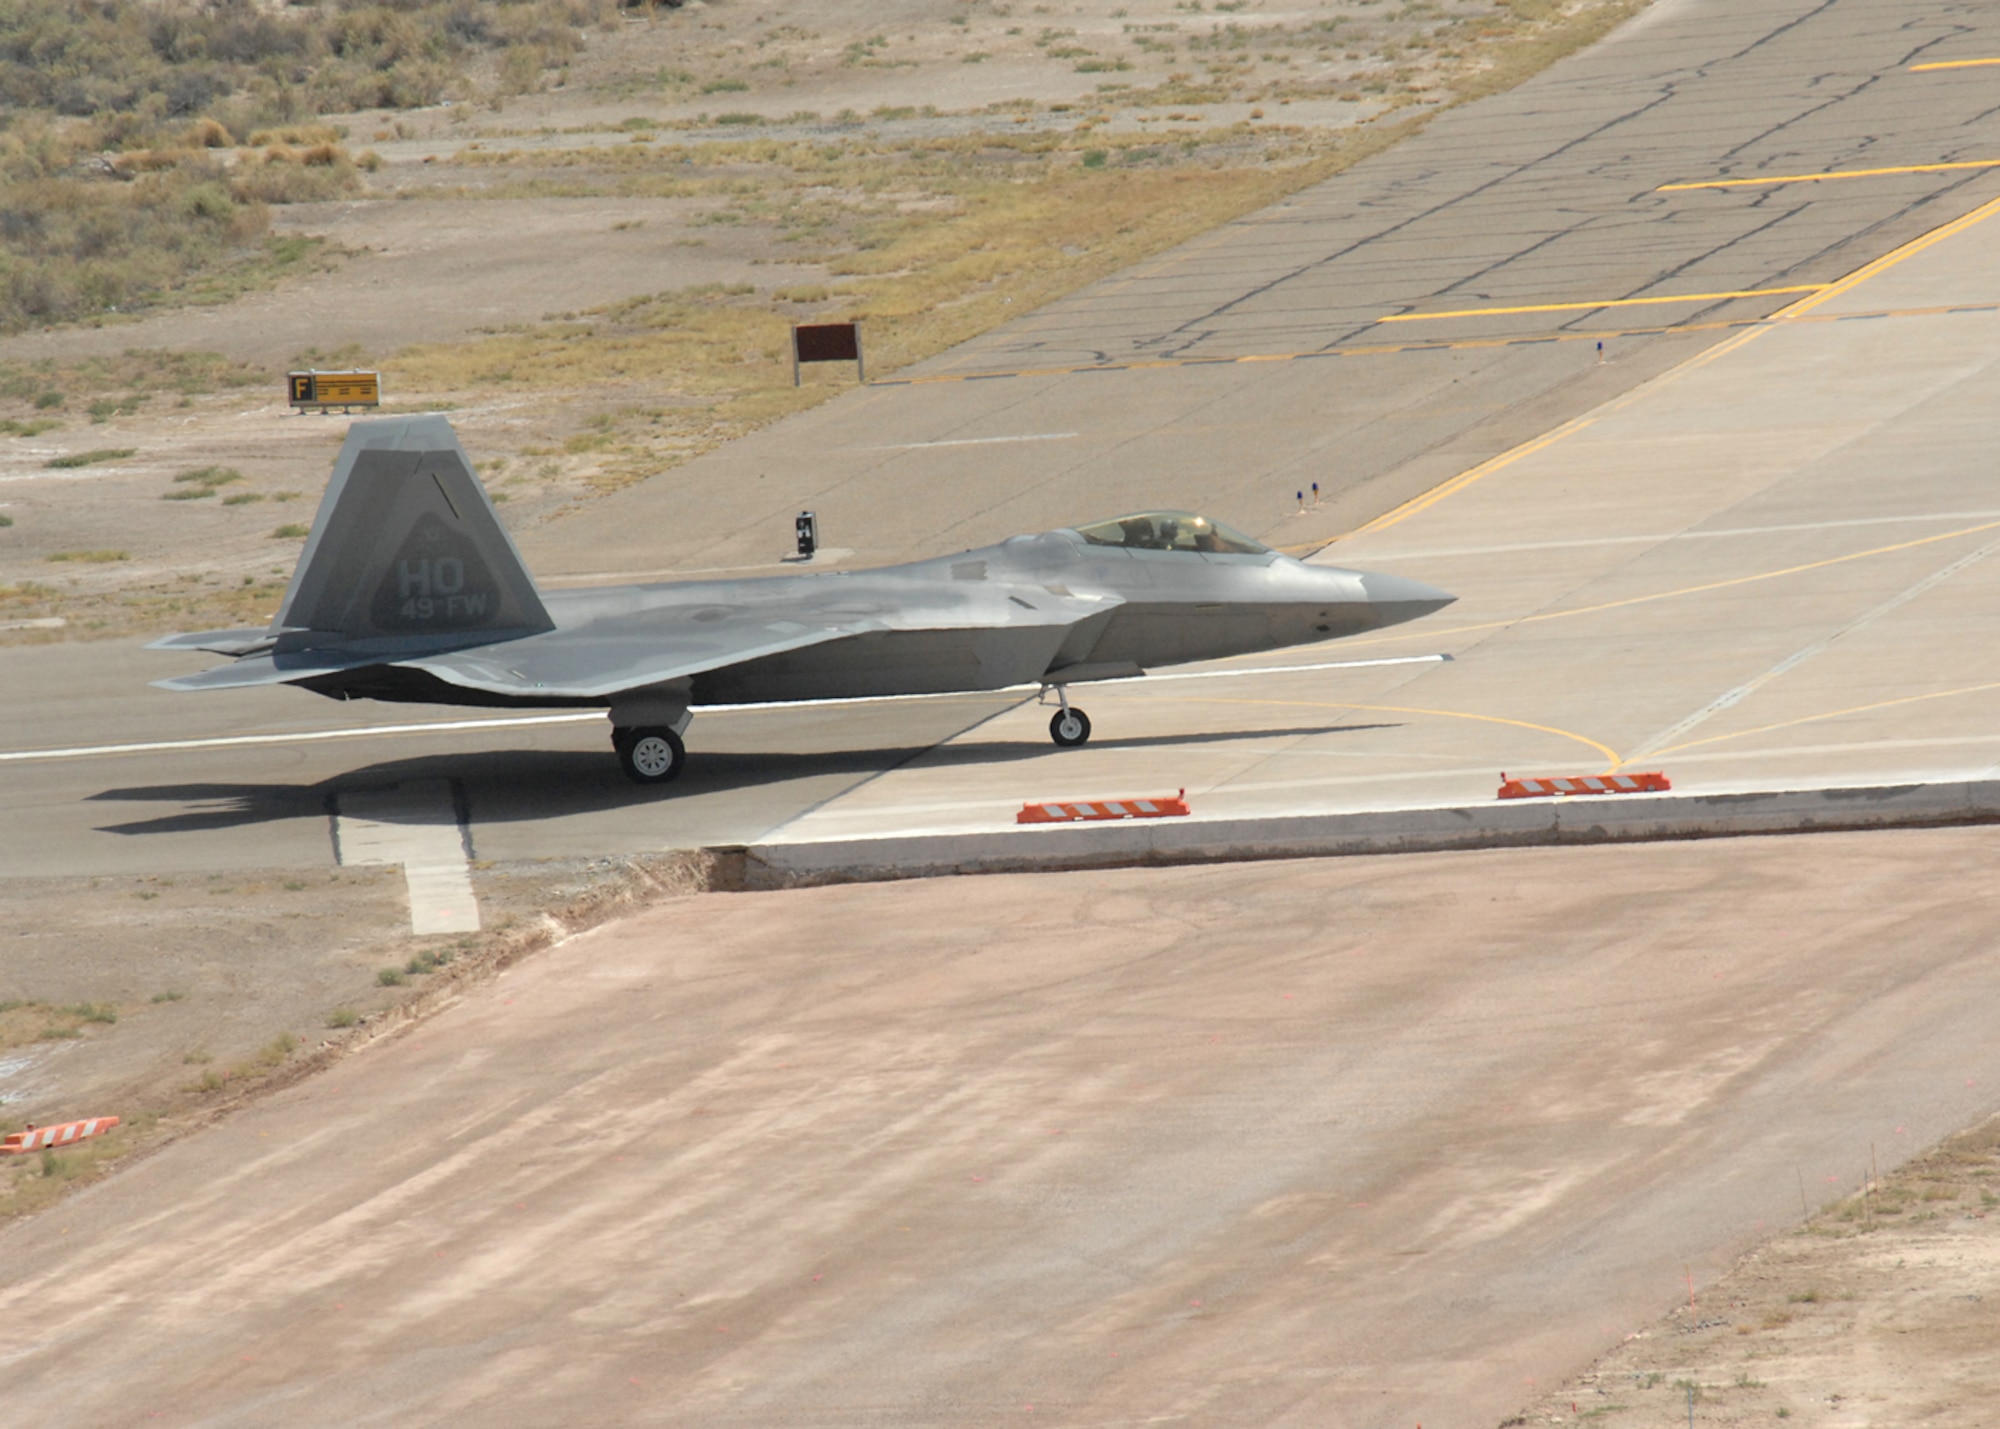 One of two F-22A Raptors taxi into Holloman Air Force Base, N.M., June 2. The jets are the first two Holloman-tailed F-22s to arrive on base. Prior to landing, the jets flew over the Tularosa Basin, allowing the local community a chance to witness the future of Holloman. (U.S. Air Force photo/Senior Airman Tiffany Trojca)